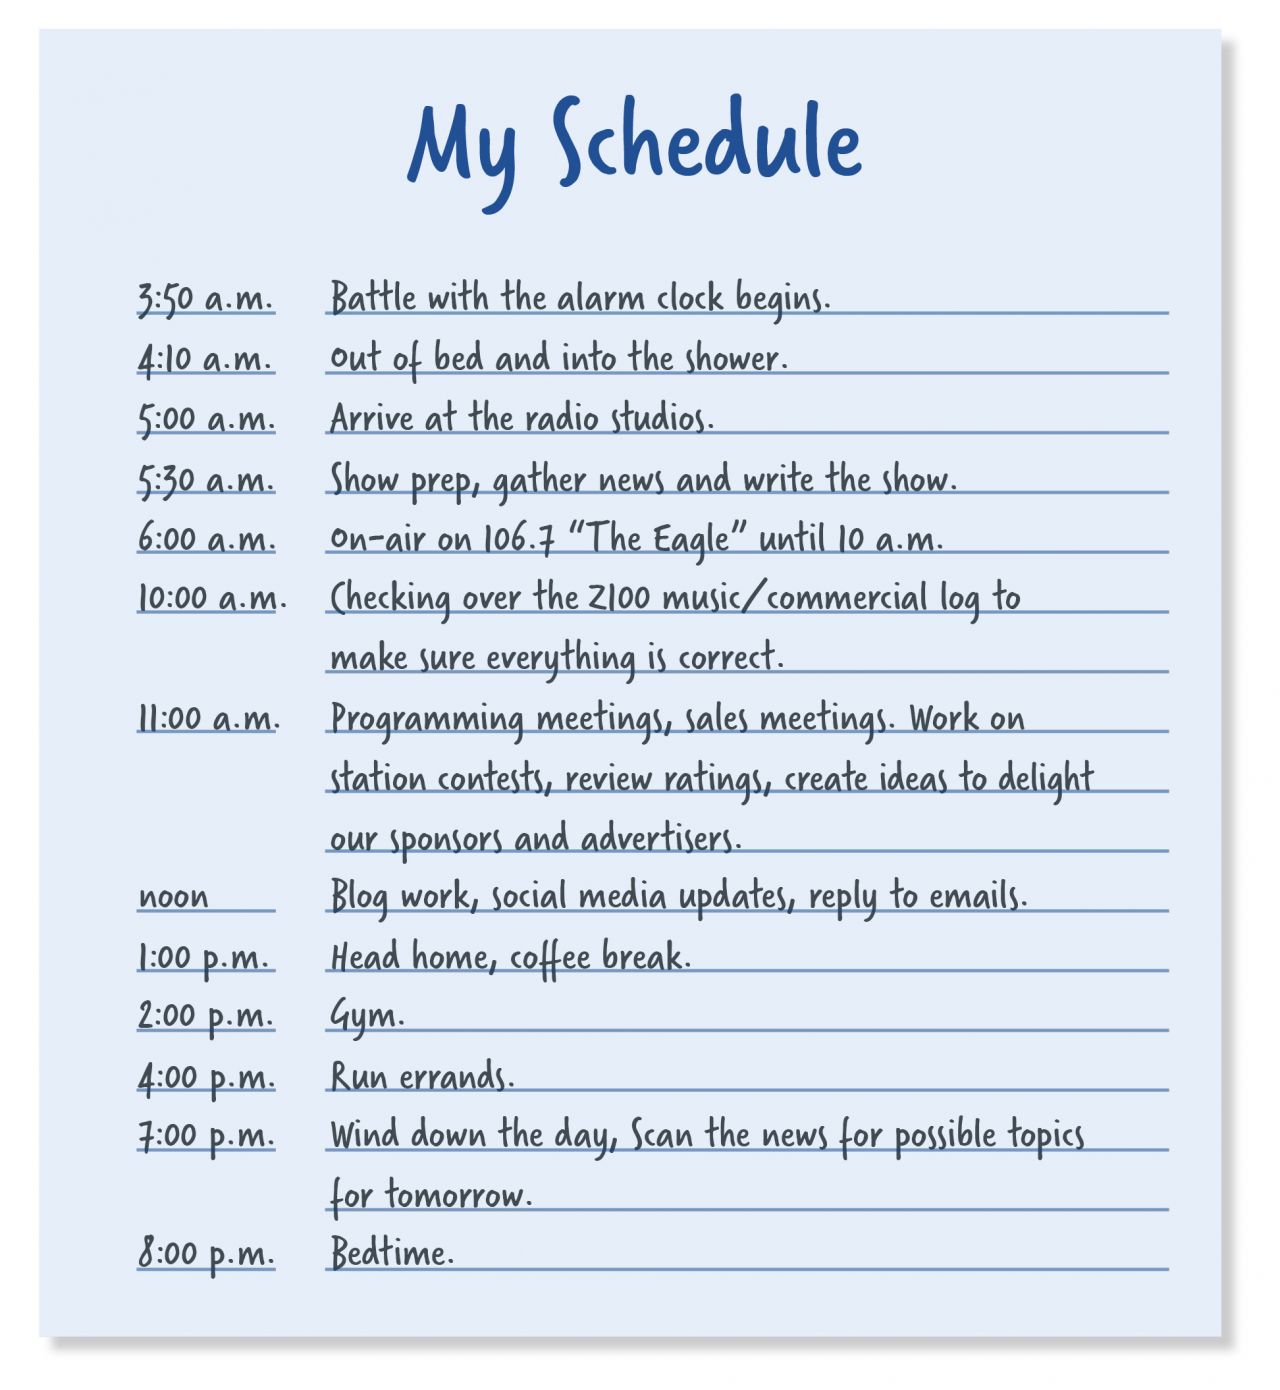 Graphic, hour by hour, of Todd Zarnitz's schedule.